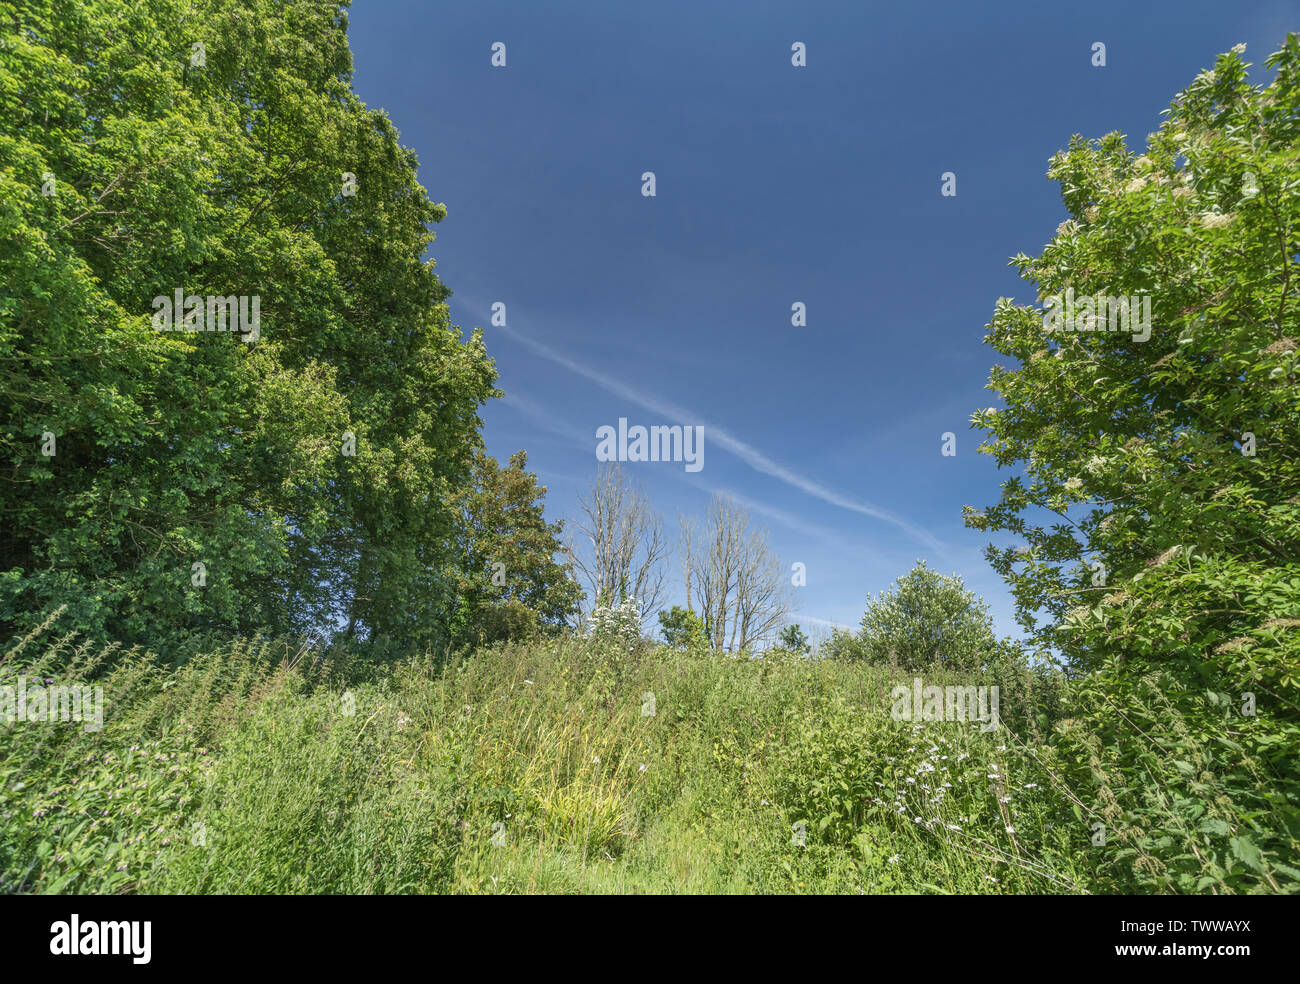 Wide angle shot of forgotten corner of a field where weeds have overgrown and taken over the ground - against blue summer sky. Stock Photo